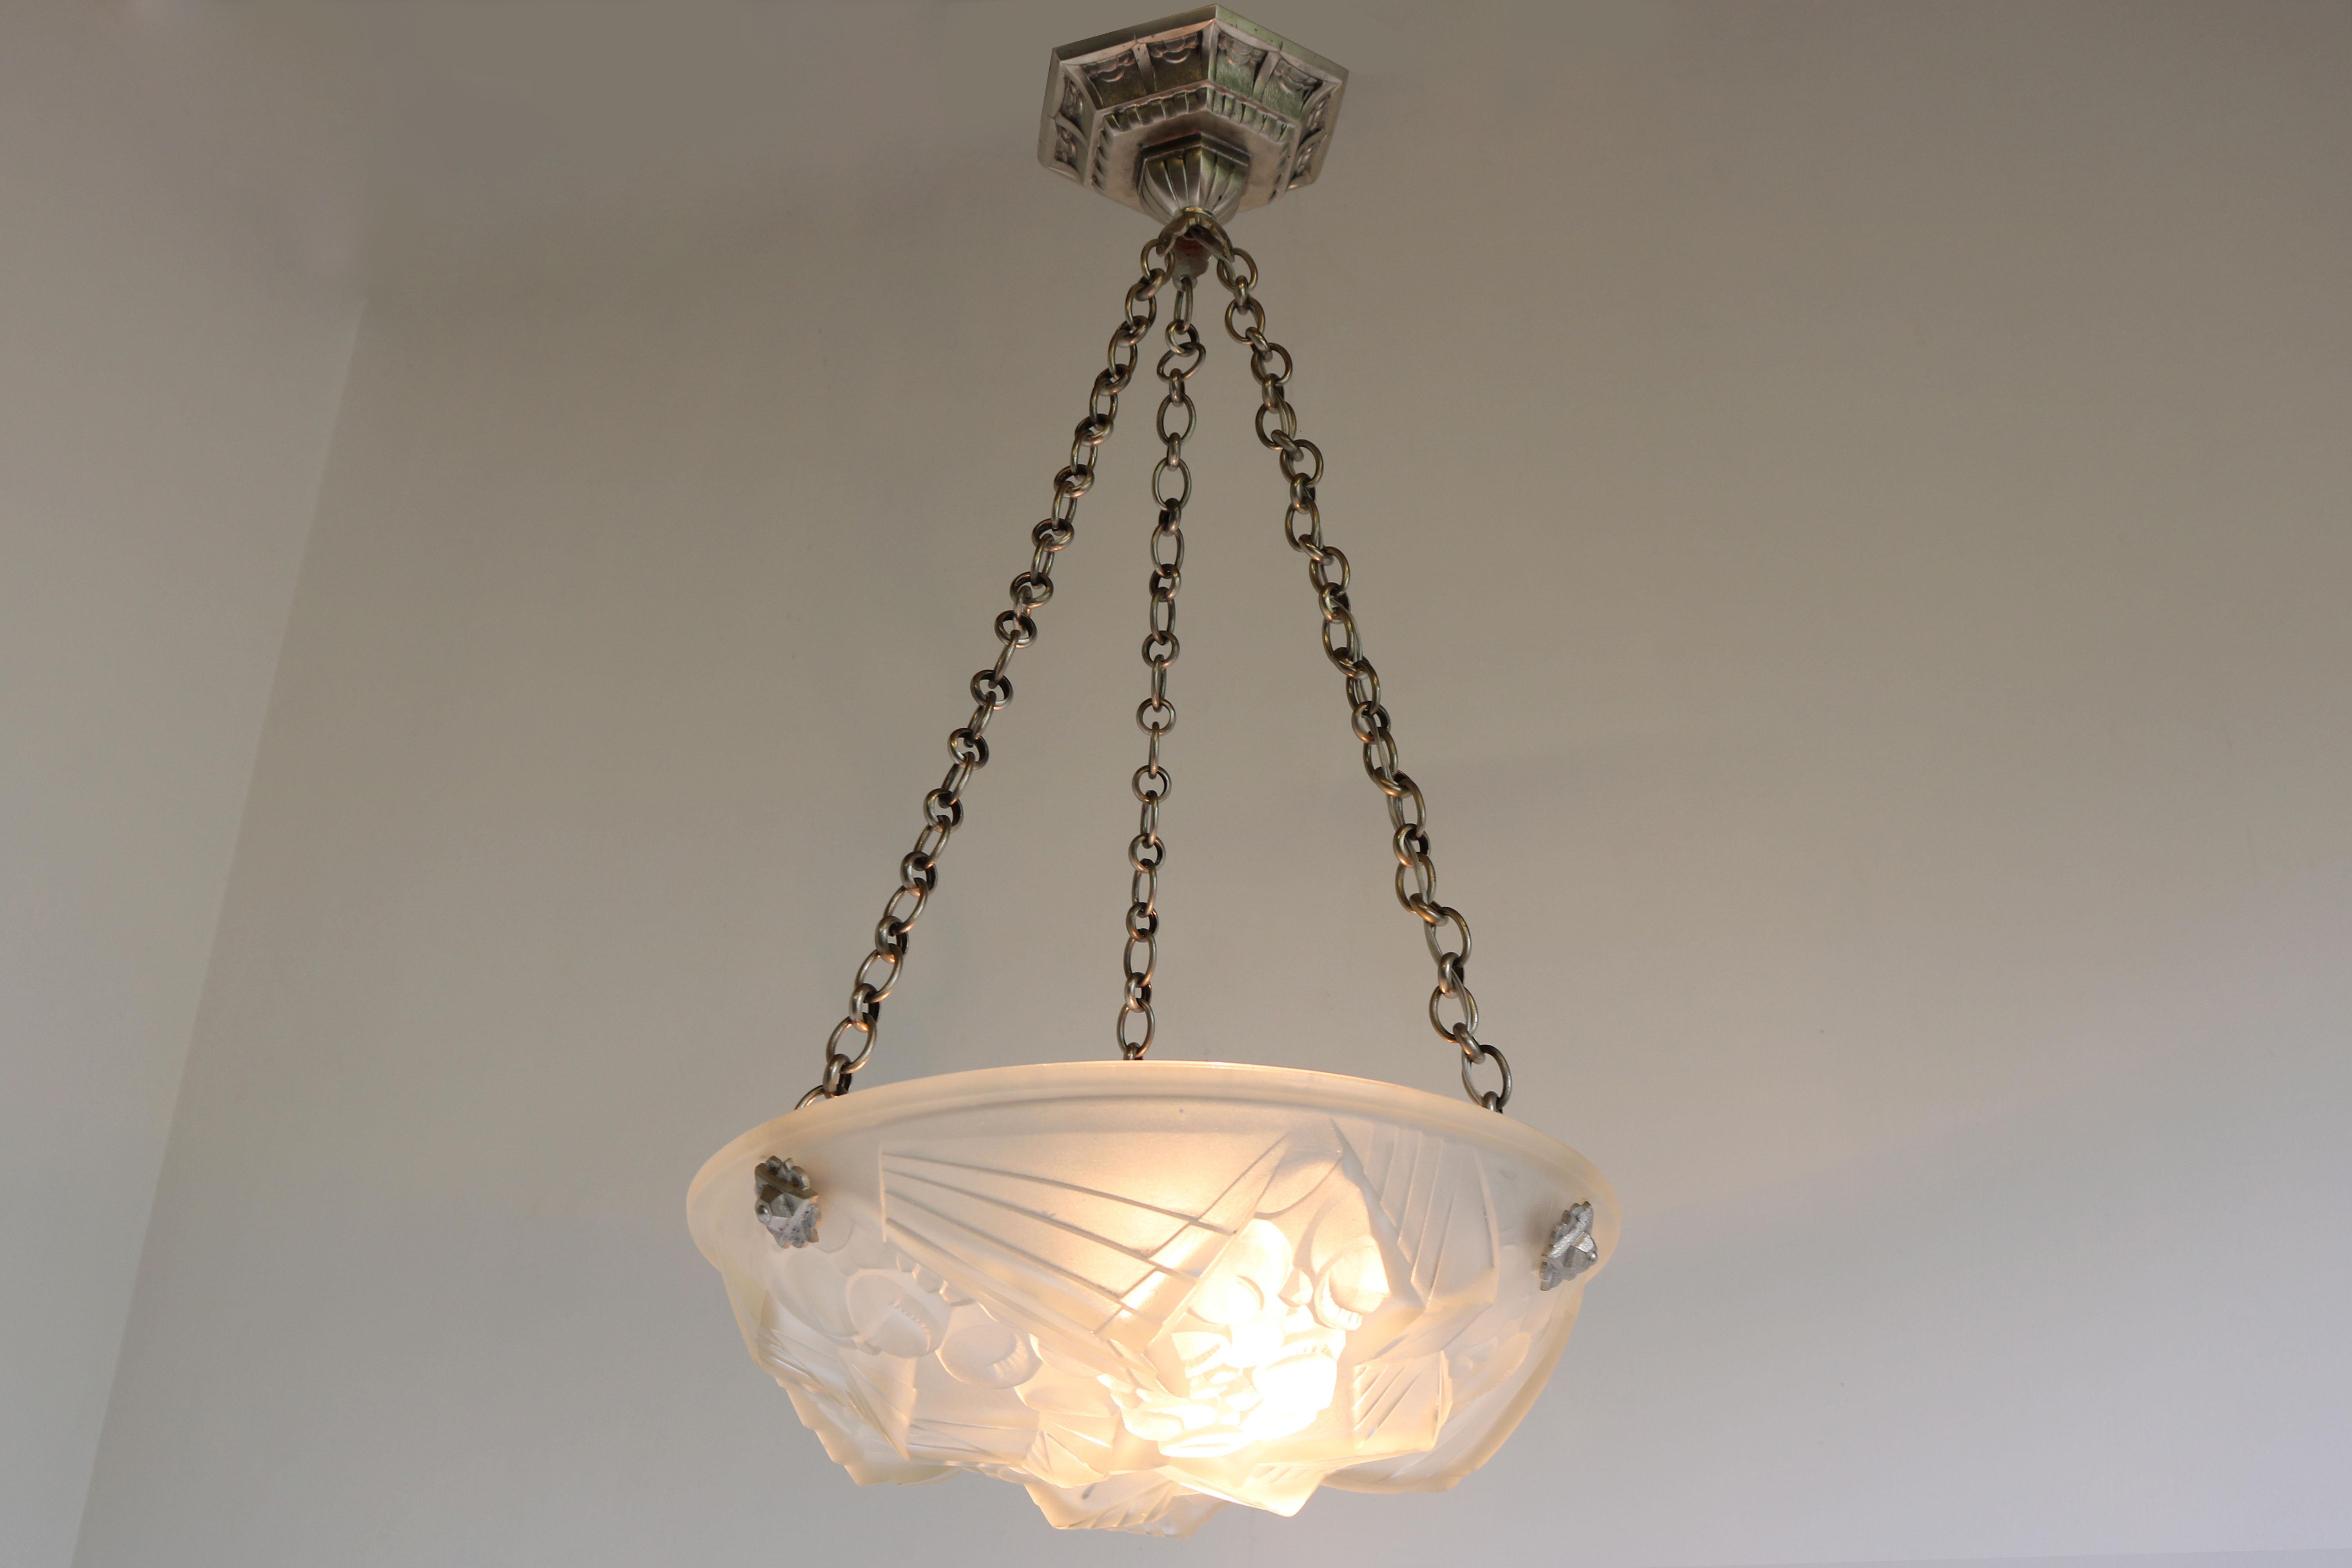 French Antique Art Deco Pendant Light Chandelier by Mouynet Design 1920 White For Sale 4